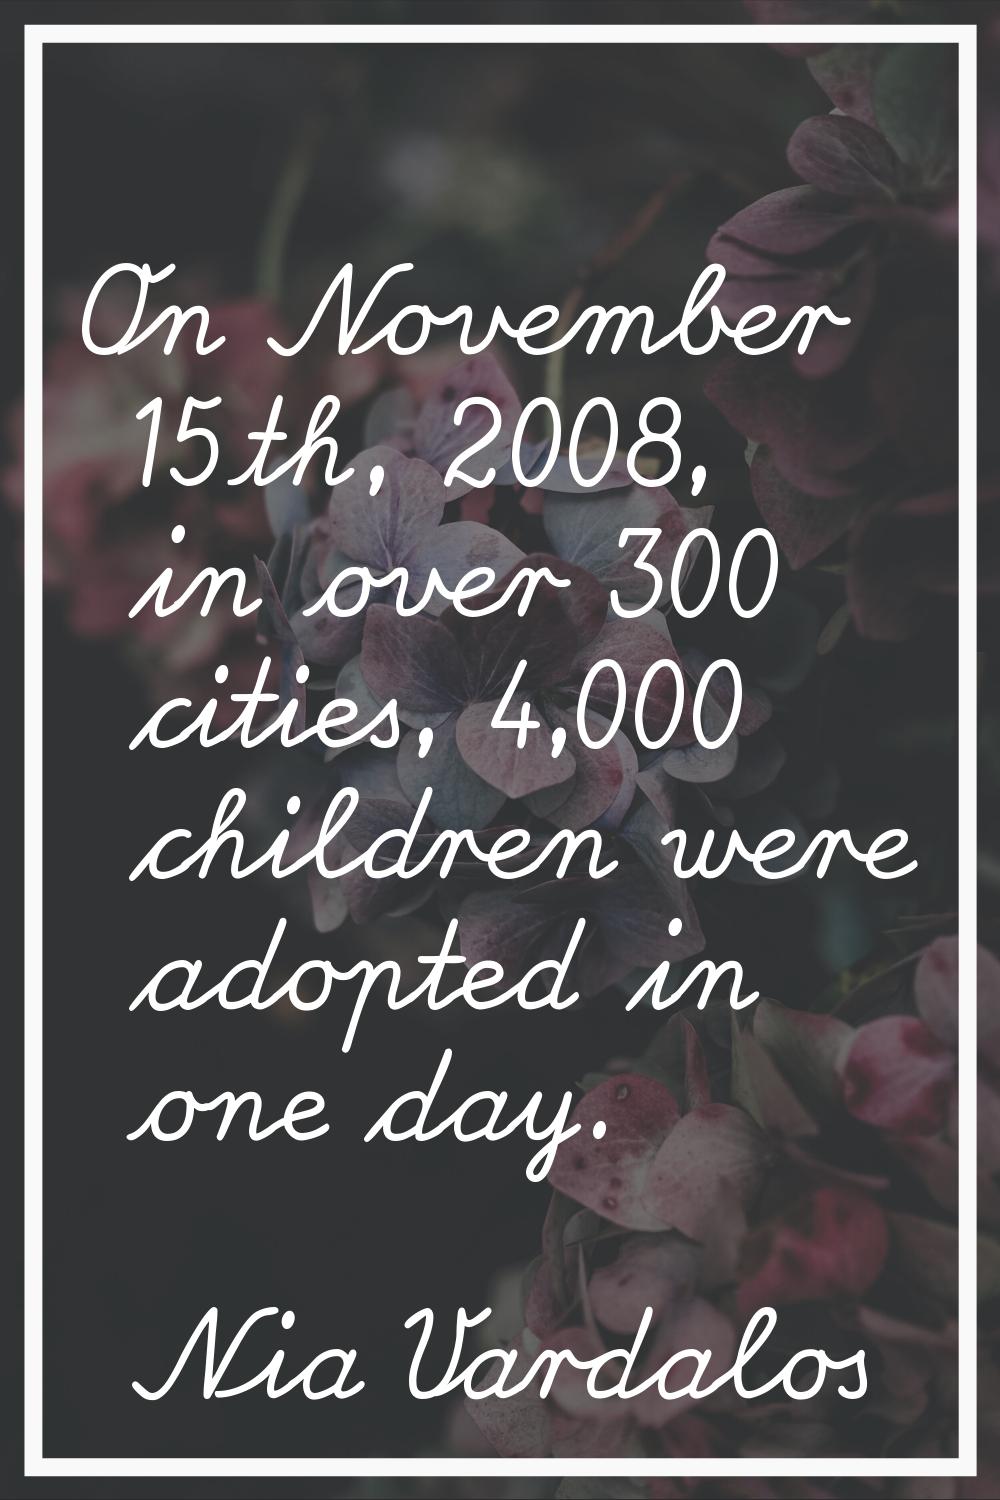 On November 15th, 2008, in over 300 cities, 4,000 children were adopted in one day.